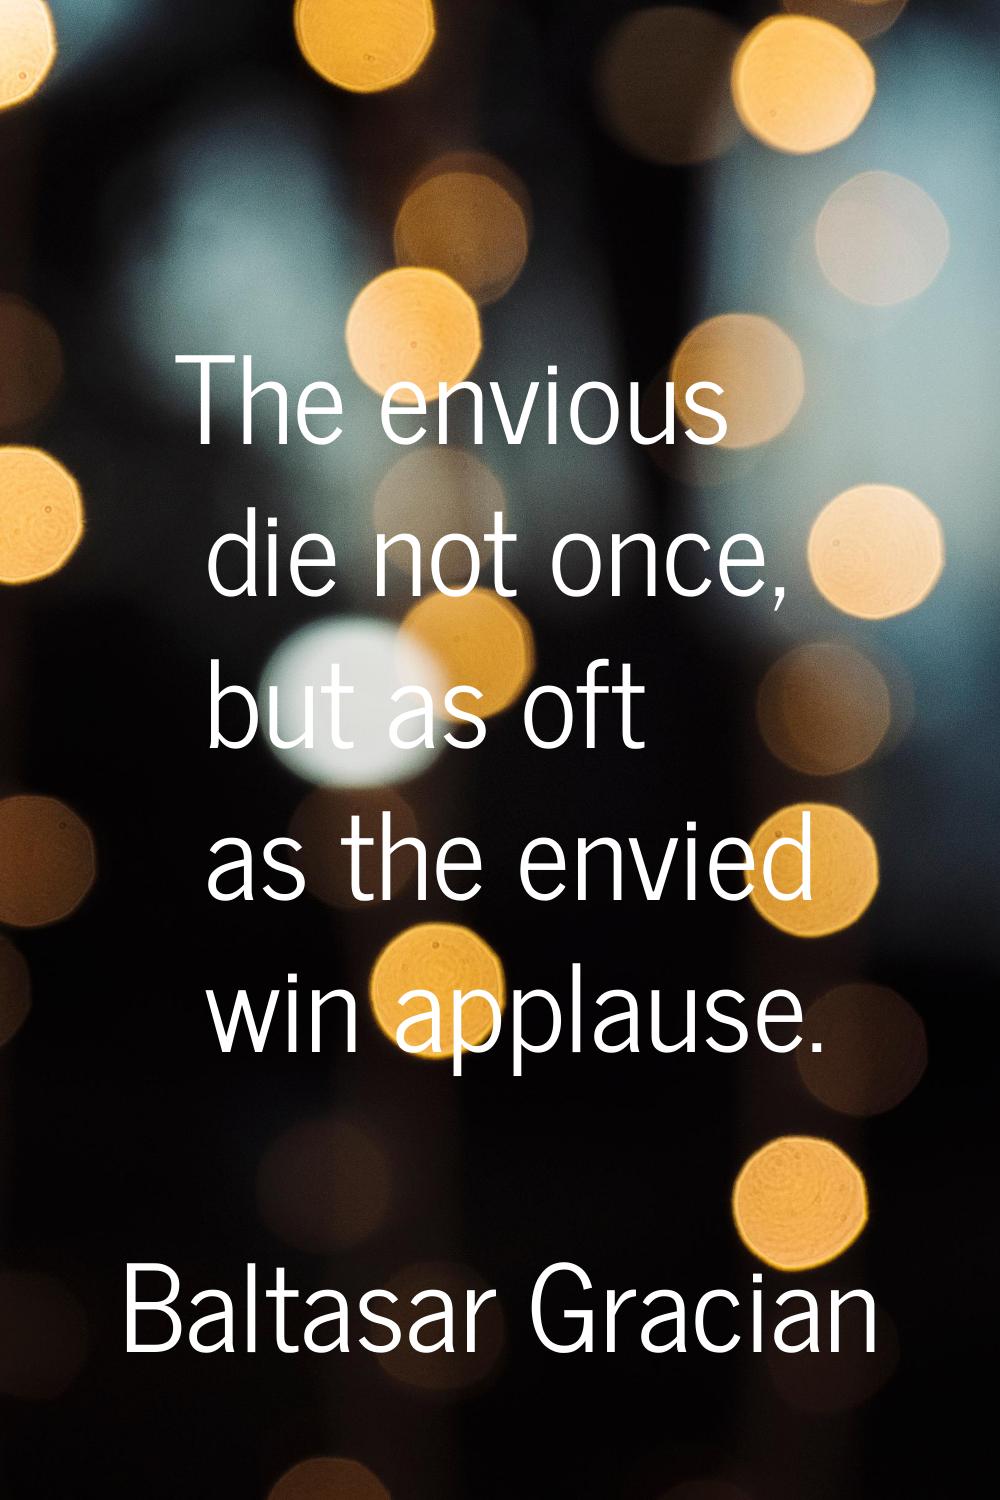 The envious die not once, but as oft as the envied win applause.